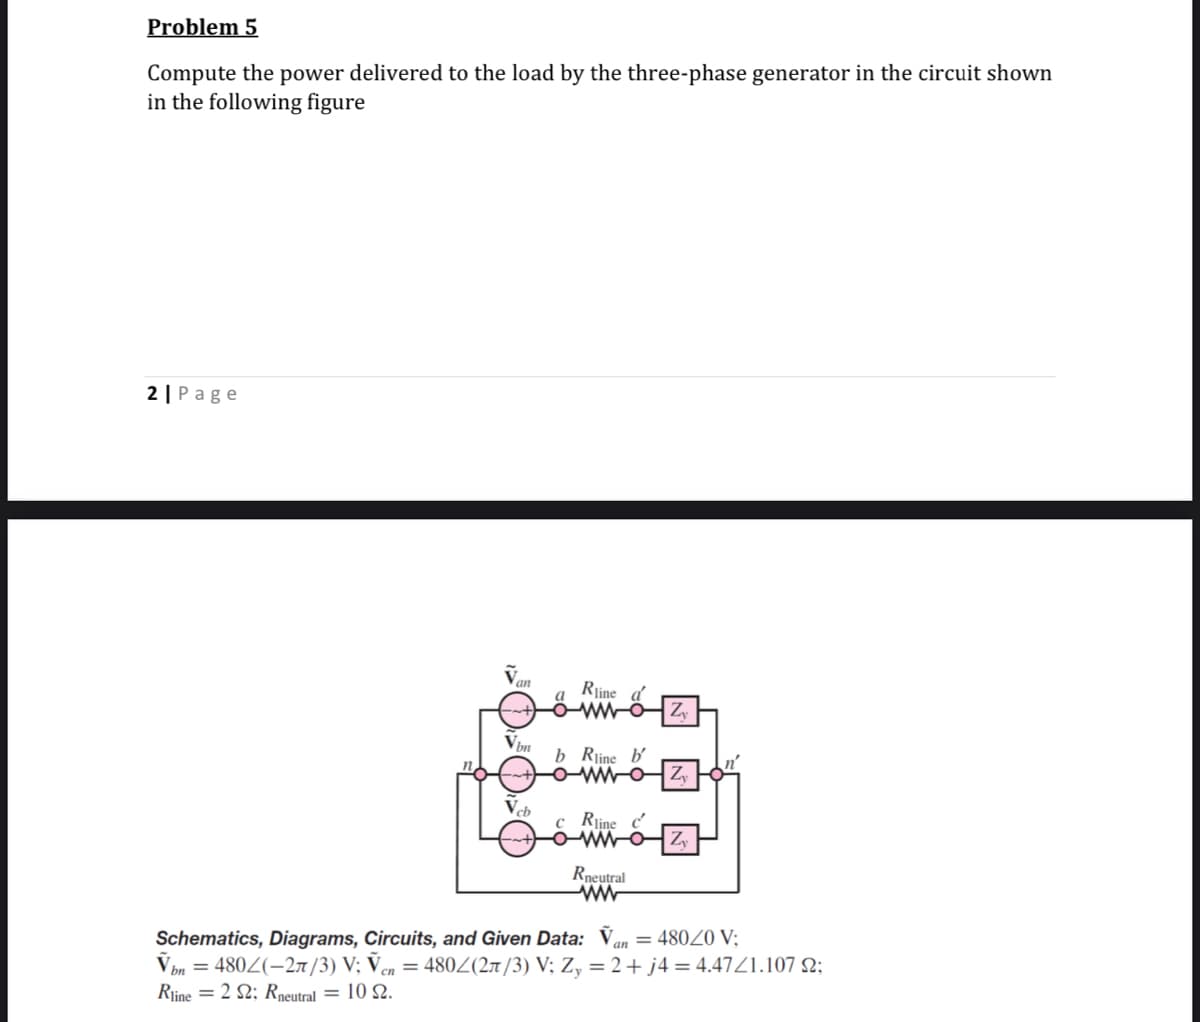 Problem 5
Compute the power delivered to the load by the three-phase generator in the circuit shown
in the following figure
2 |Page
an
Rjine a
ww-ÖZ,
a
b Rline b'
Vcb
c Rline c'
Rneutral
Schematics, Diagrams, Circuits, and Given Data: V,
V ôn = 480Z(-27n /3) V; Ven = 480Z(27/3) V; Z, = 2+ j4 = 4.47Z1.107 N;
Rjine = 2 2; Rneutral = 10 2.
an = 48020 V:
